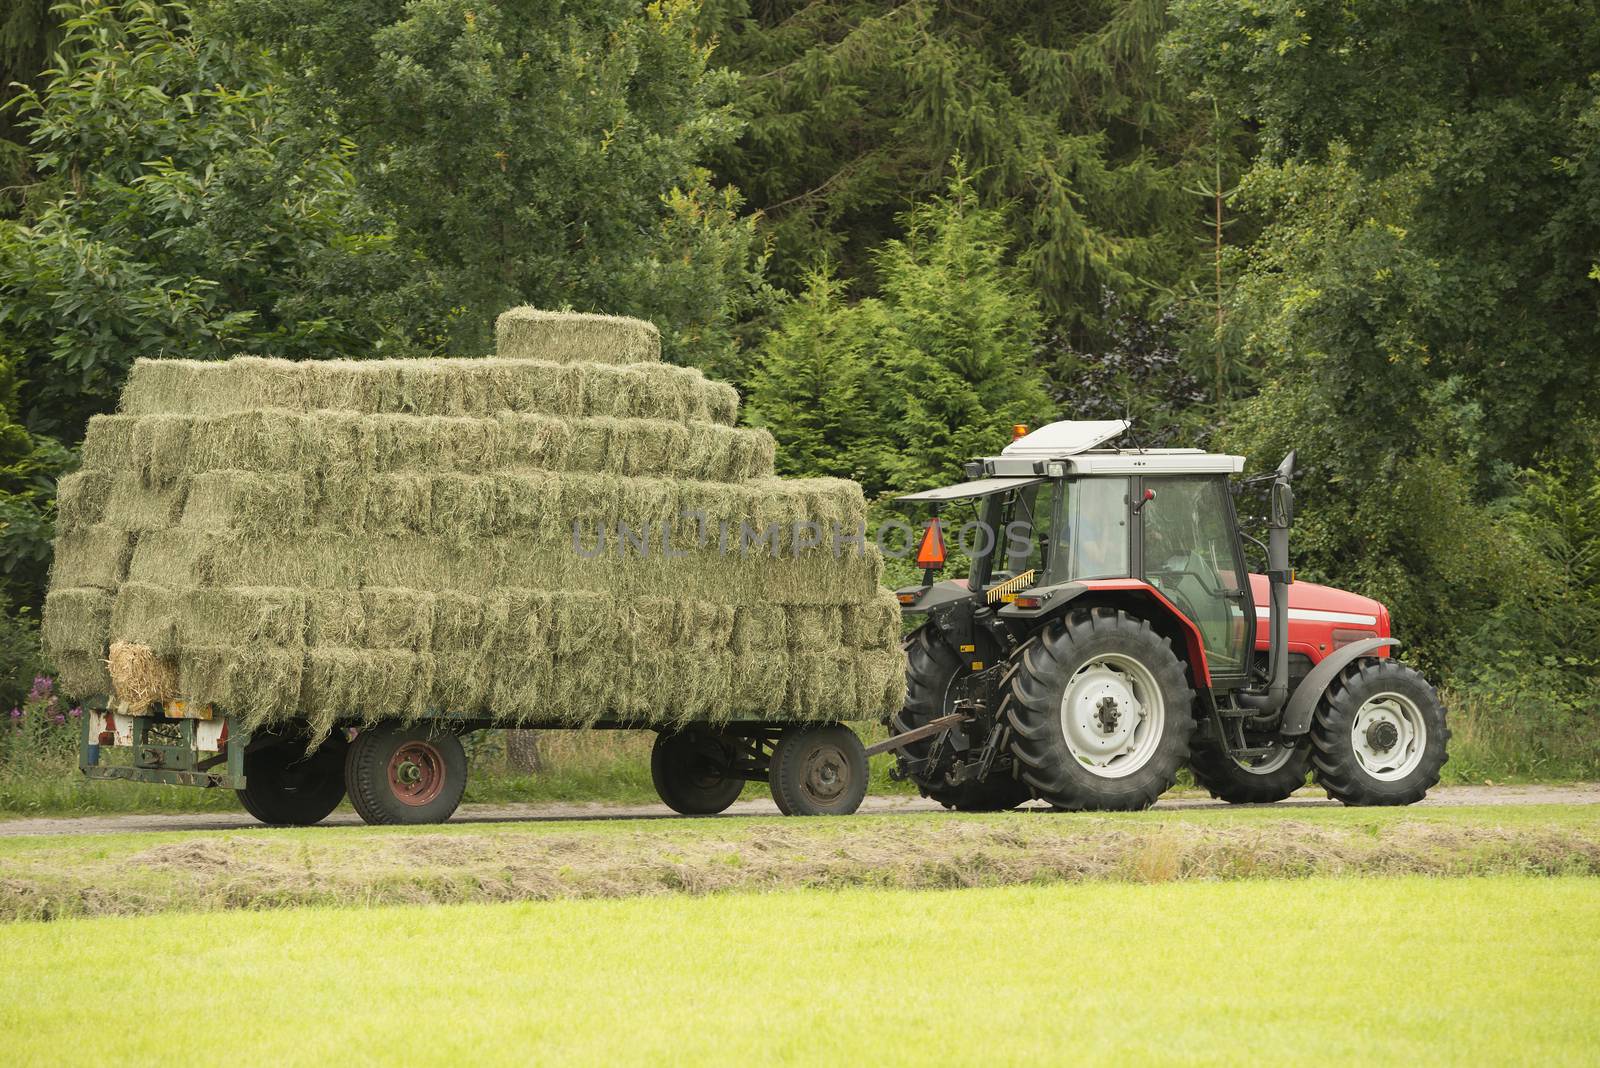 Transportation of bales of hay
 by Tofotografie